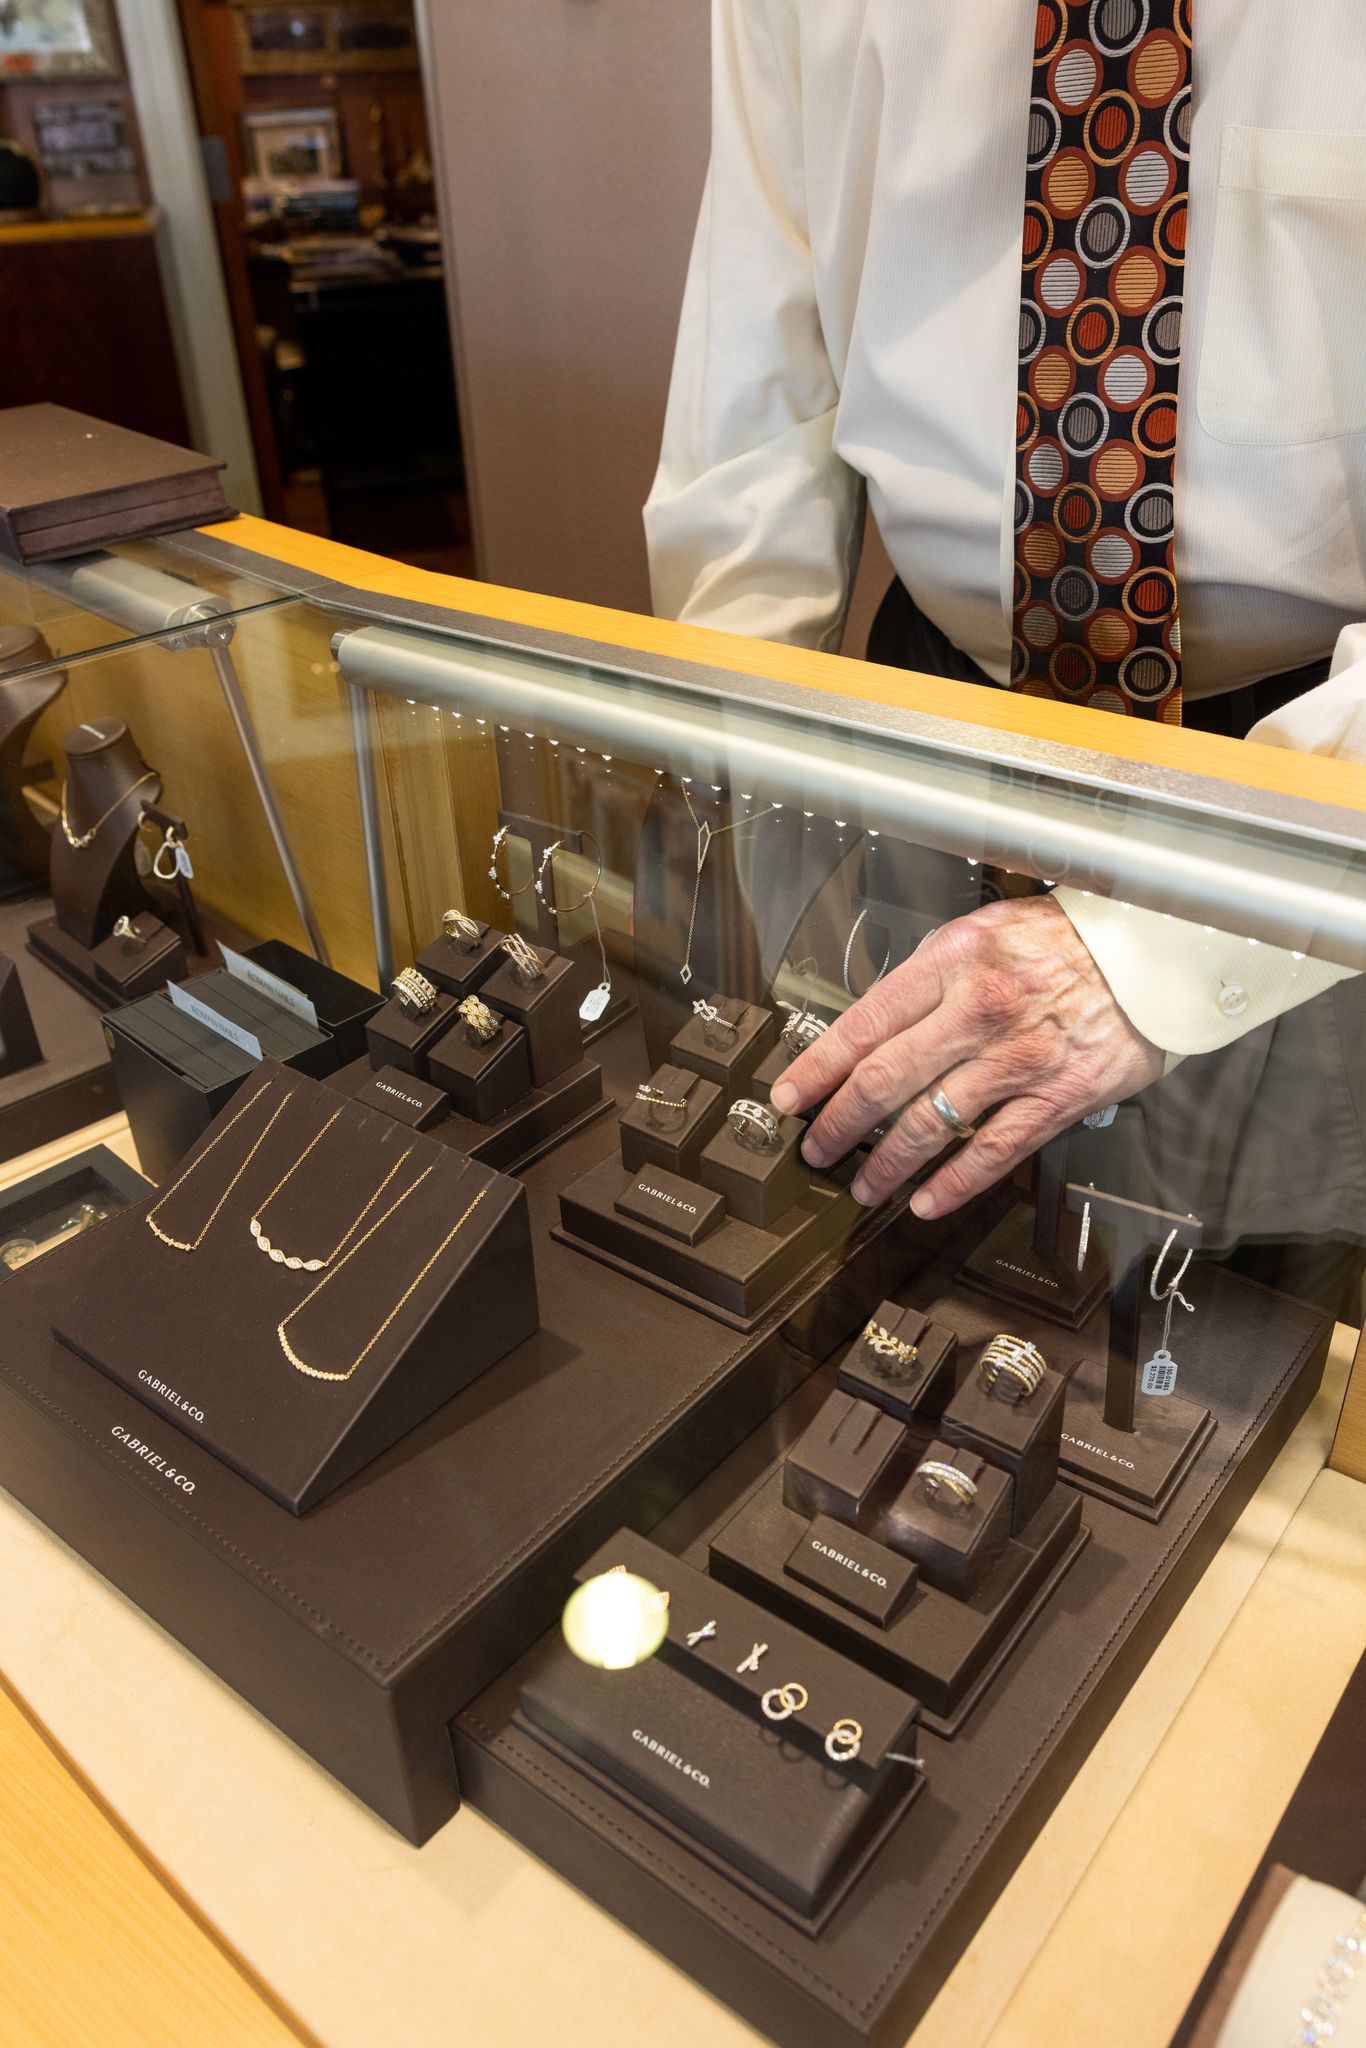 A case of necklaces, earrings and other fine jewelry pieces in a case at Simon Jewelers in High Point, NC.